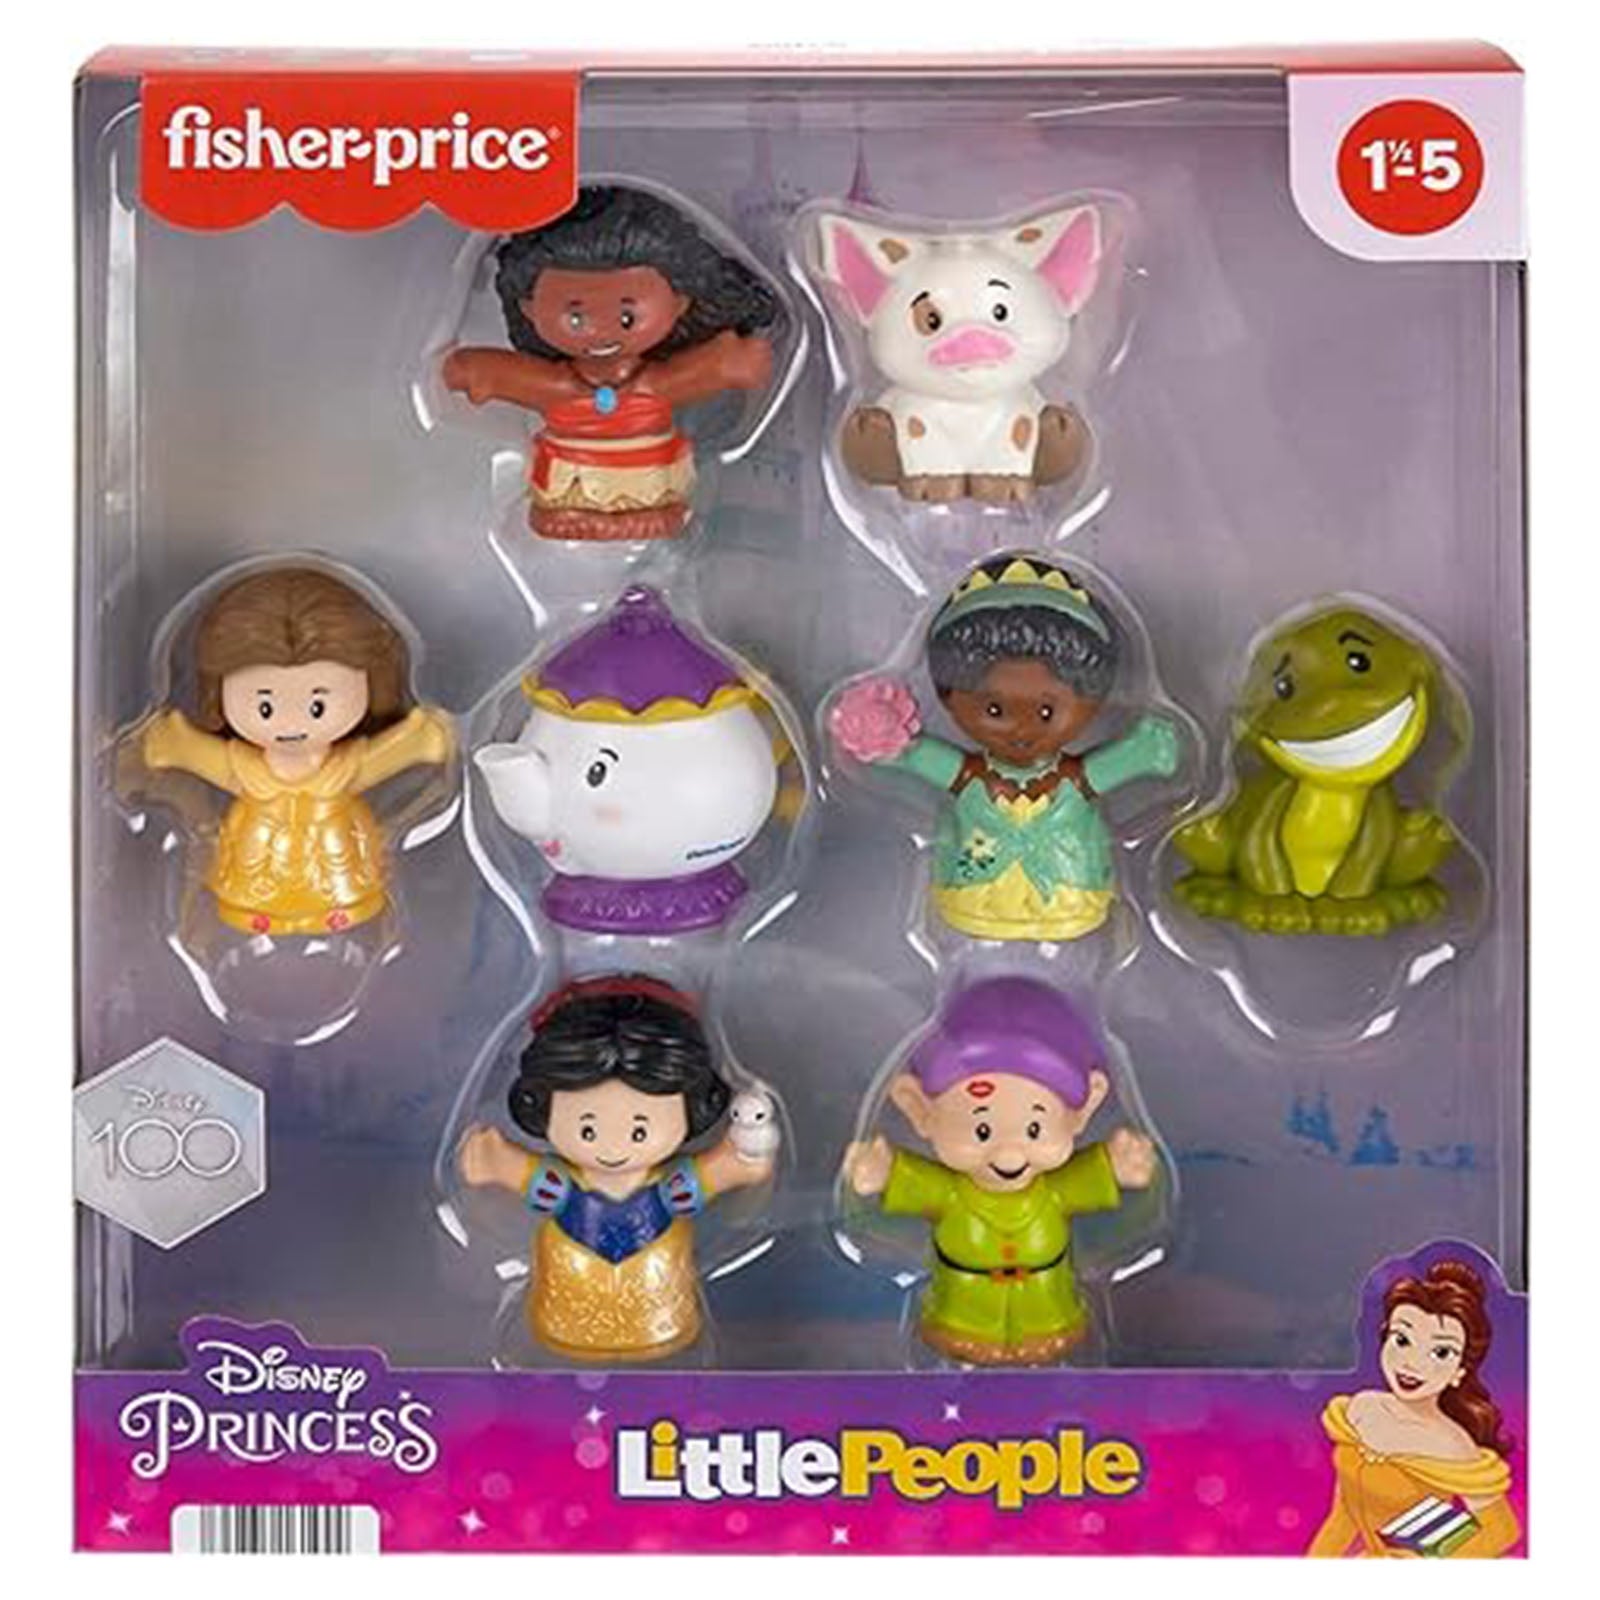 Little People - Fisher Price 